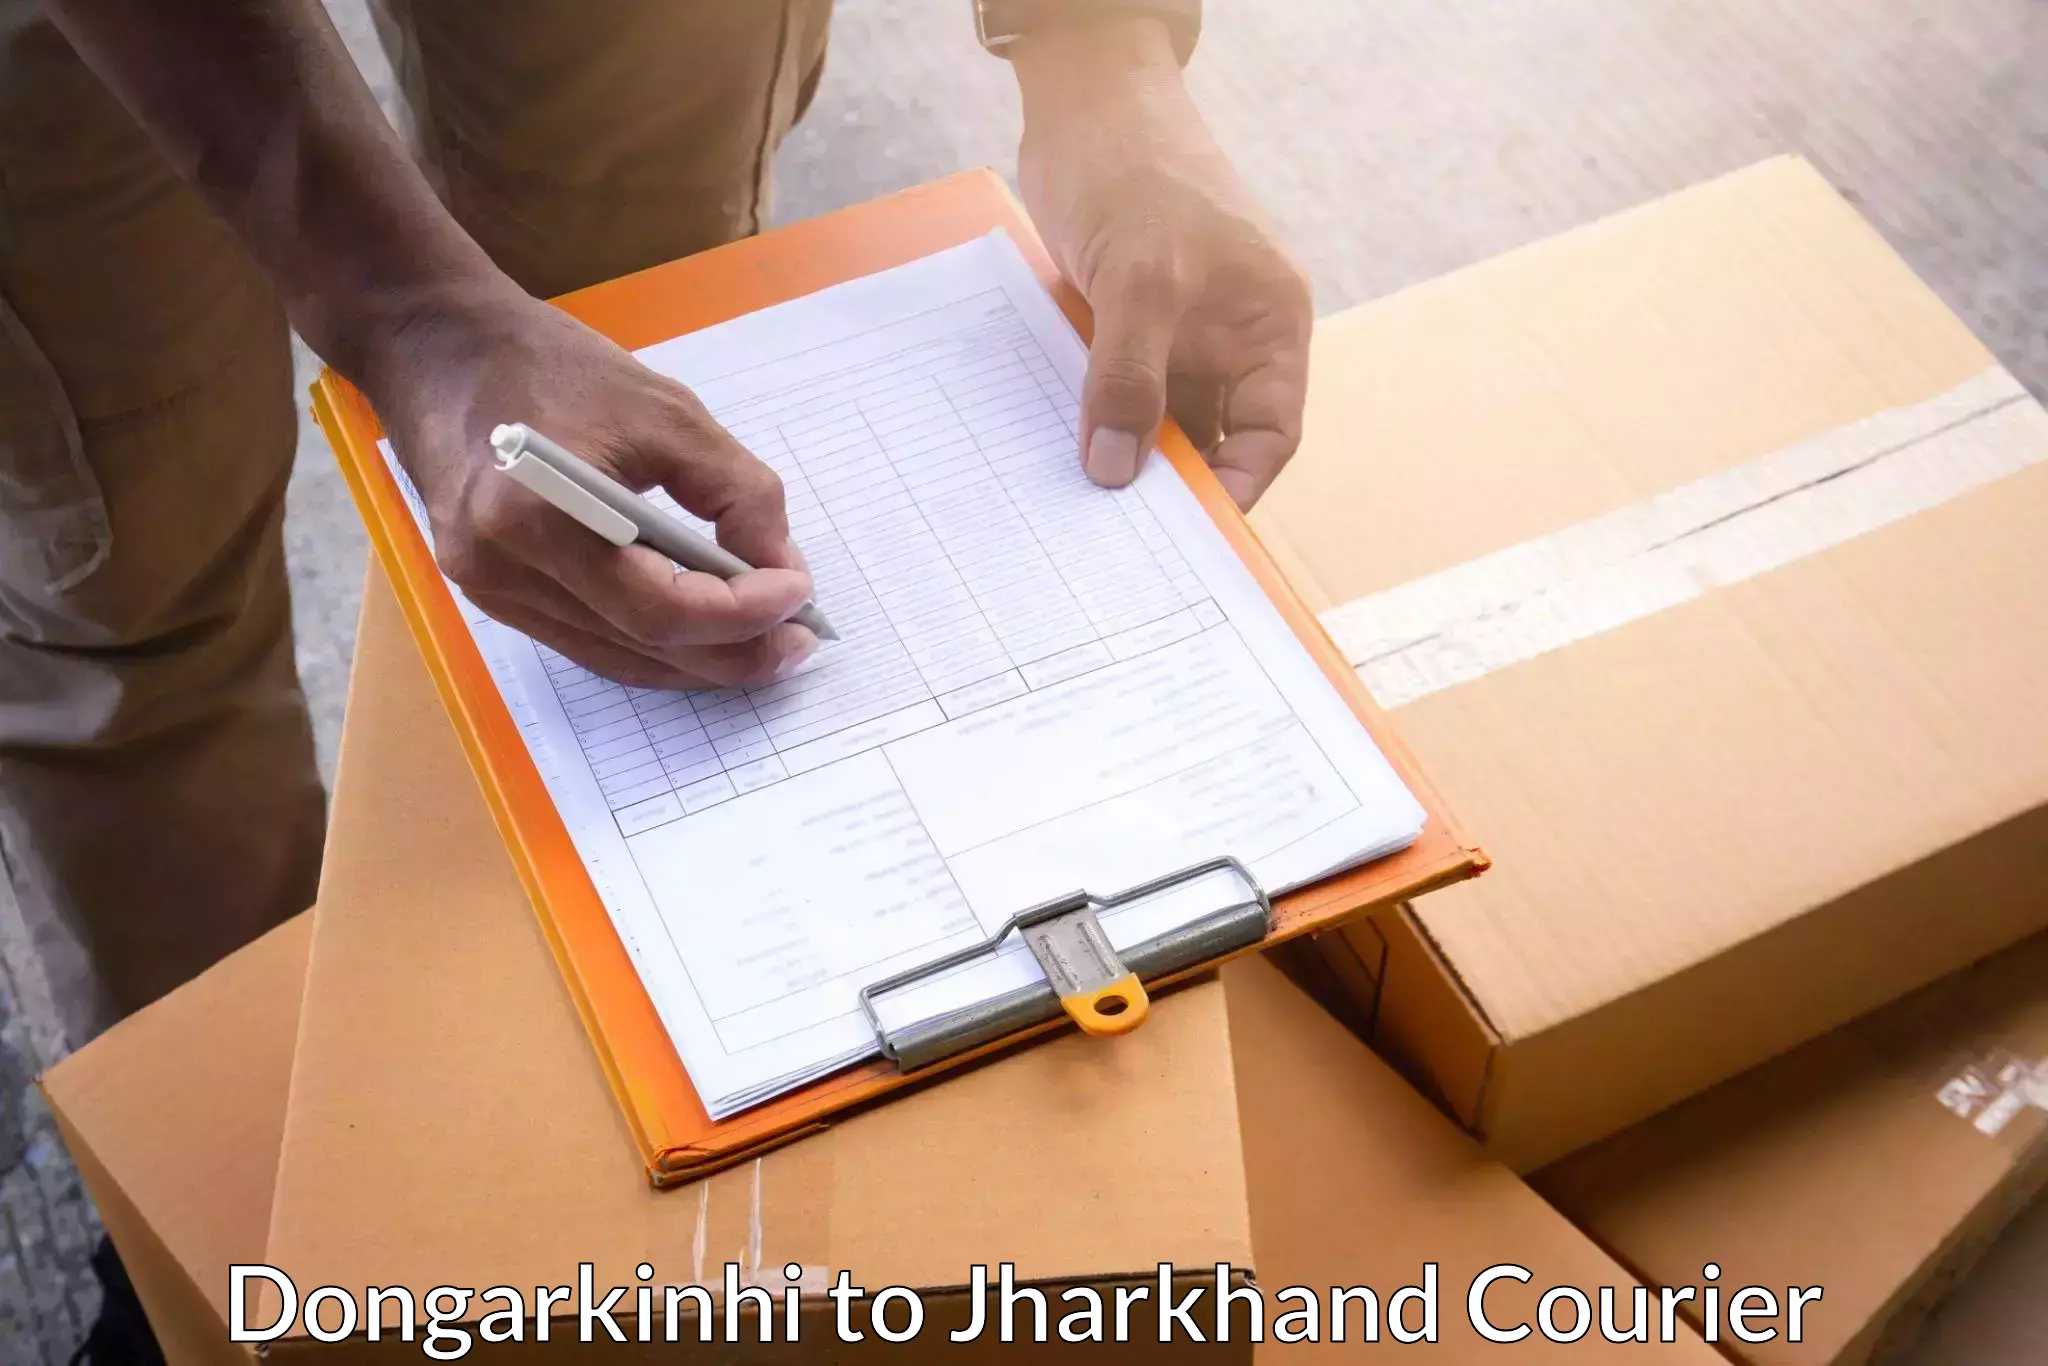 Automated parcel services Dongarkinhi to Bagodar